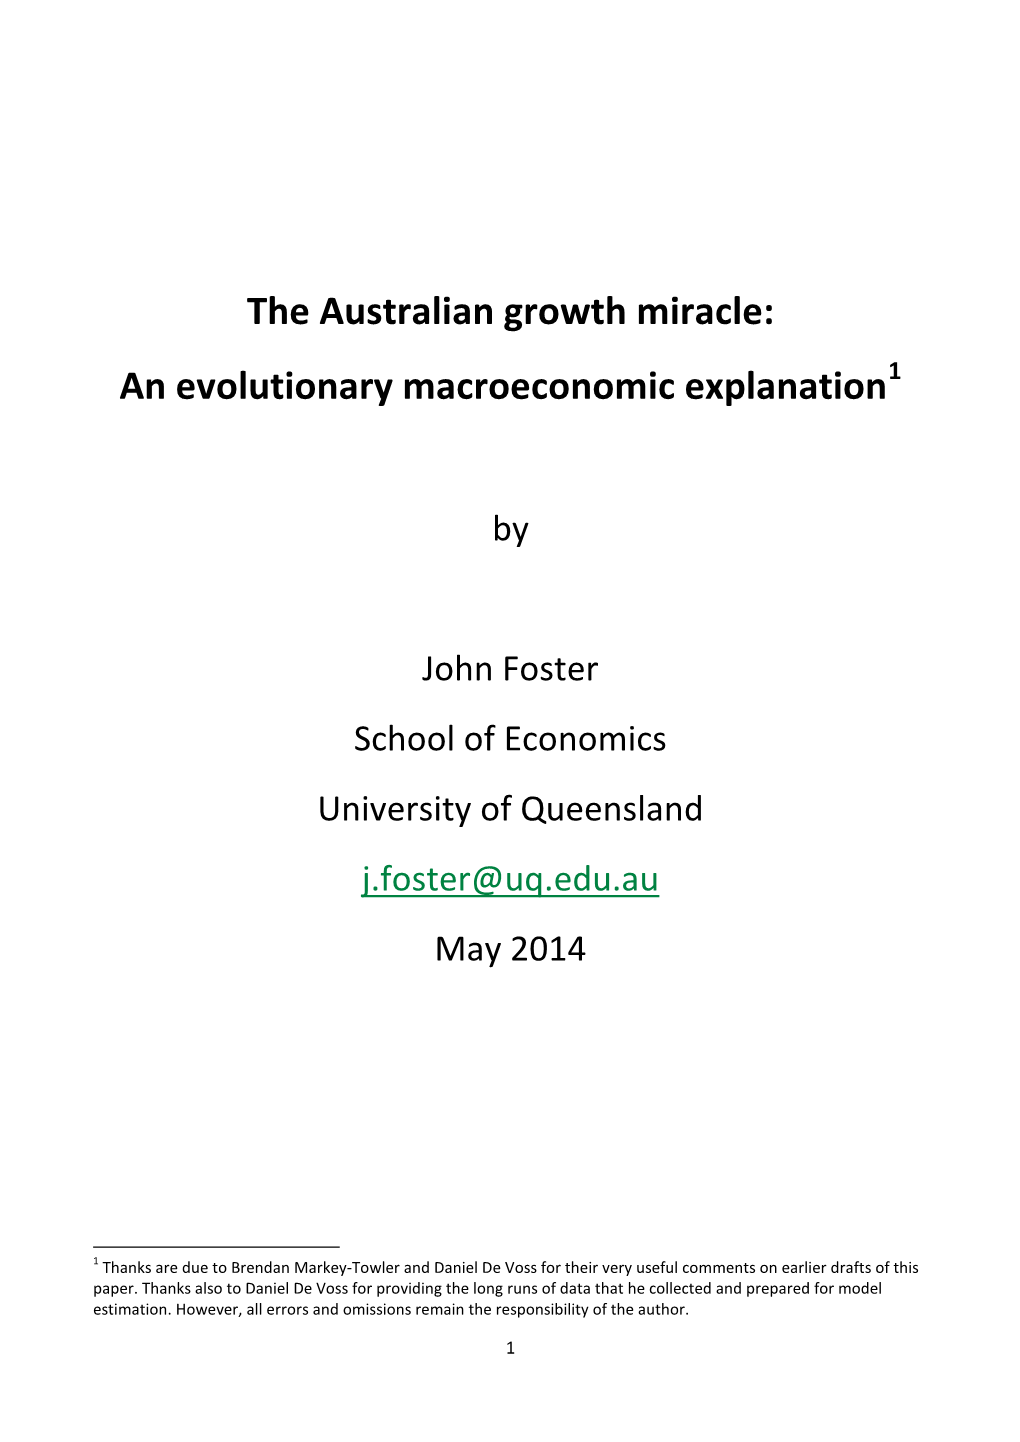 The Australian Growth Miracle: an Evolutionary Macroeconomic Explanation1